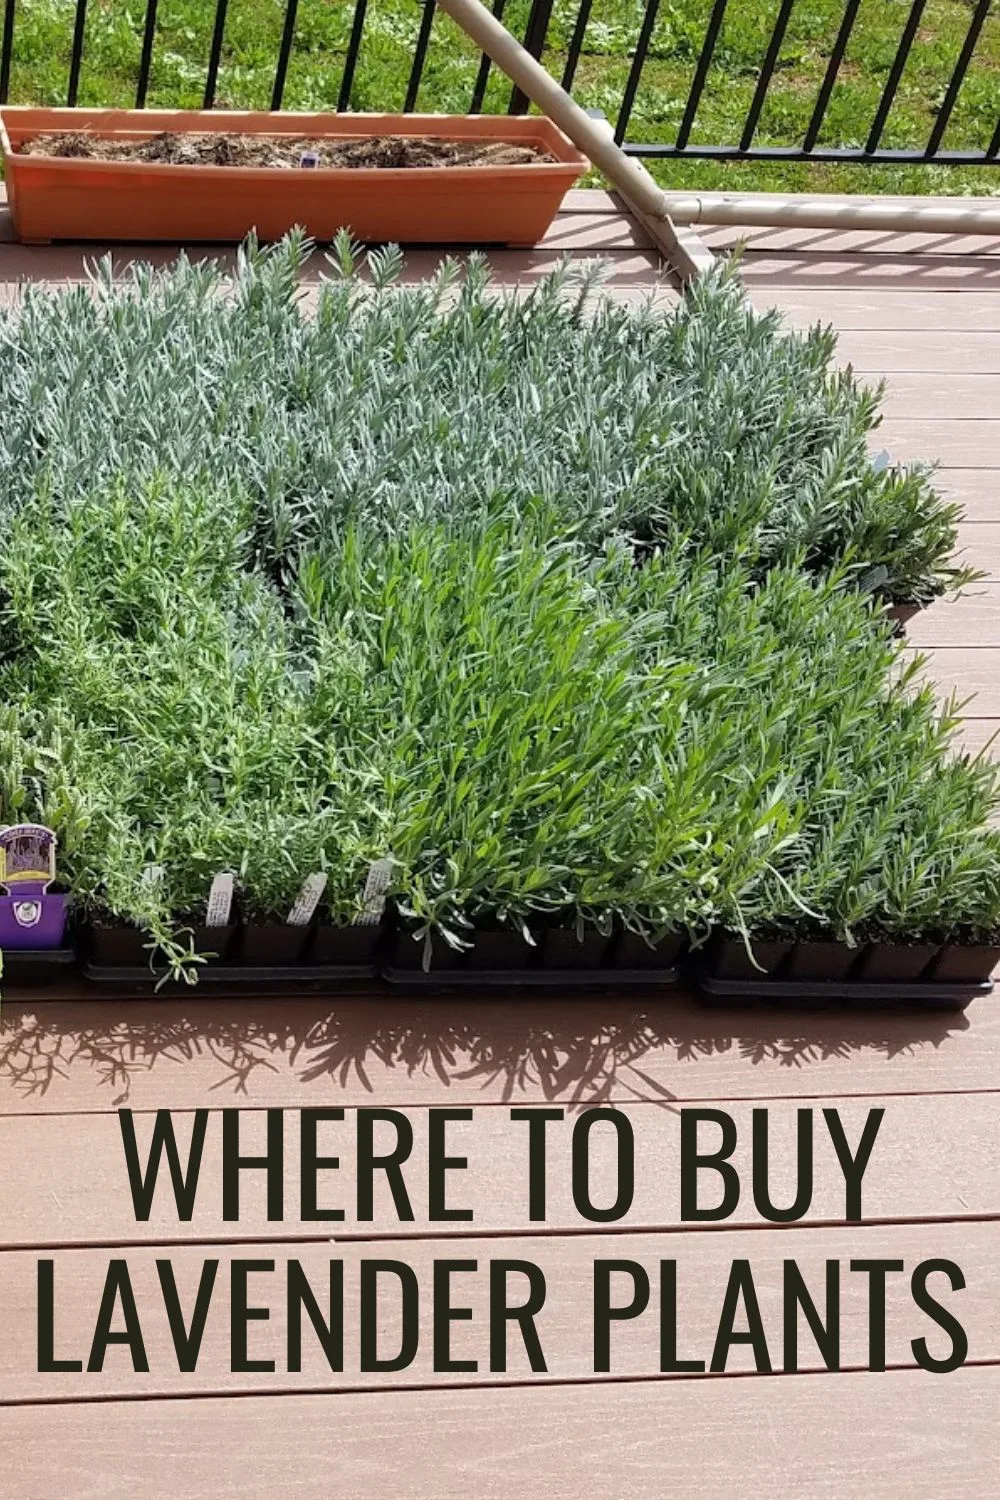 Where to buy lavender plants.